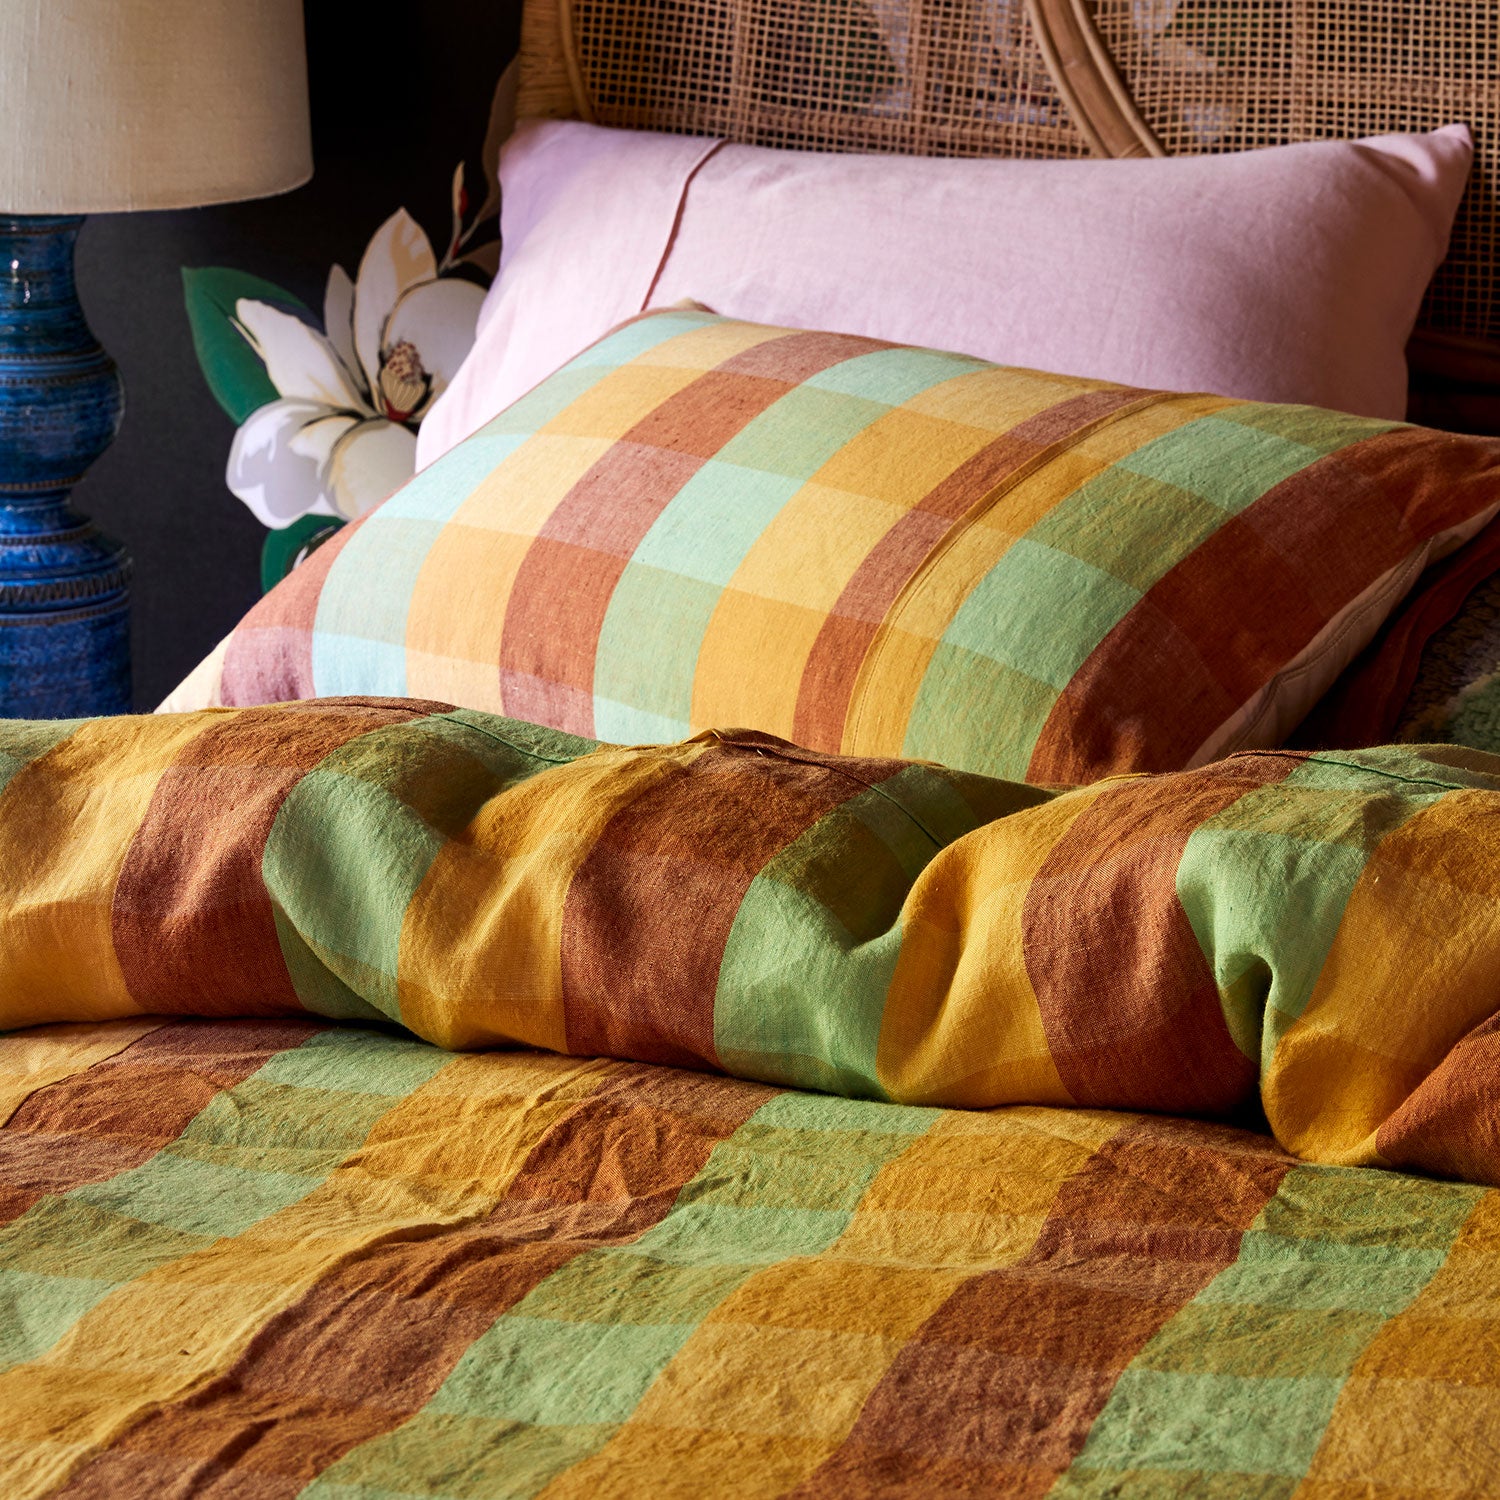 Kip & Co Striped colorful bedsheets